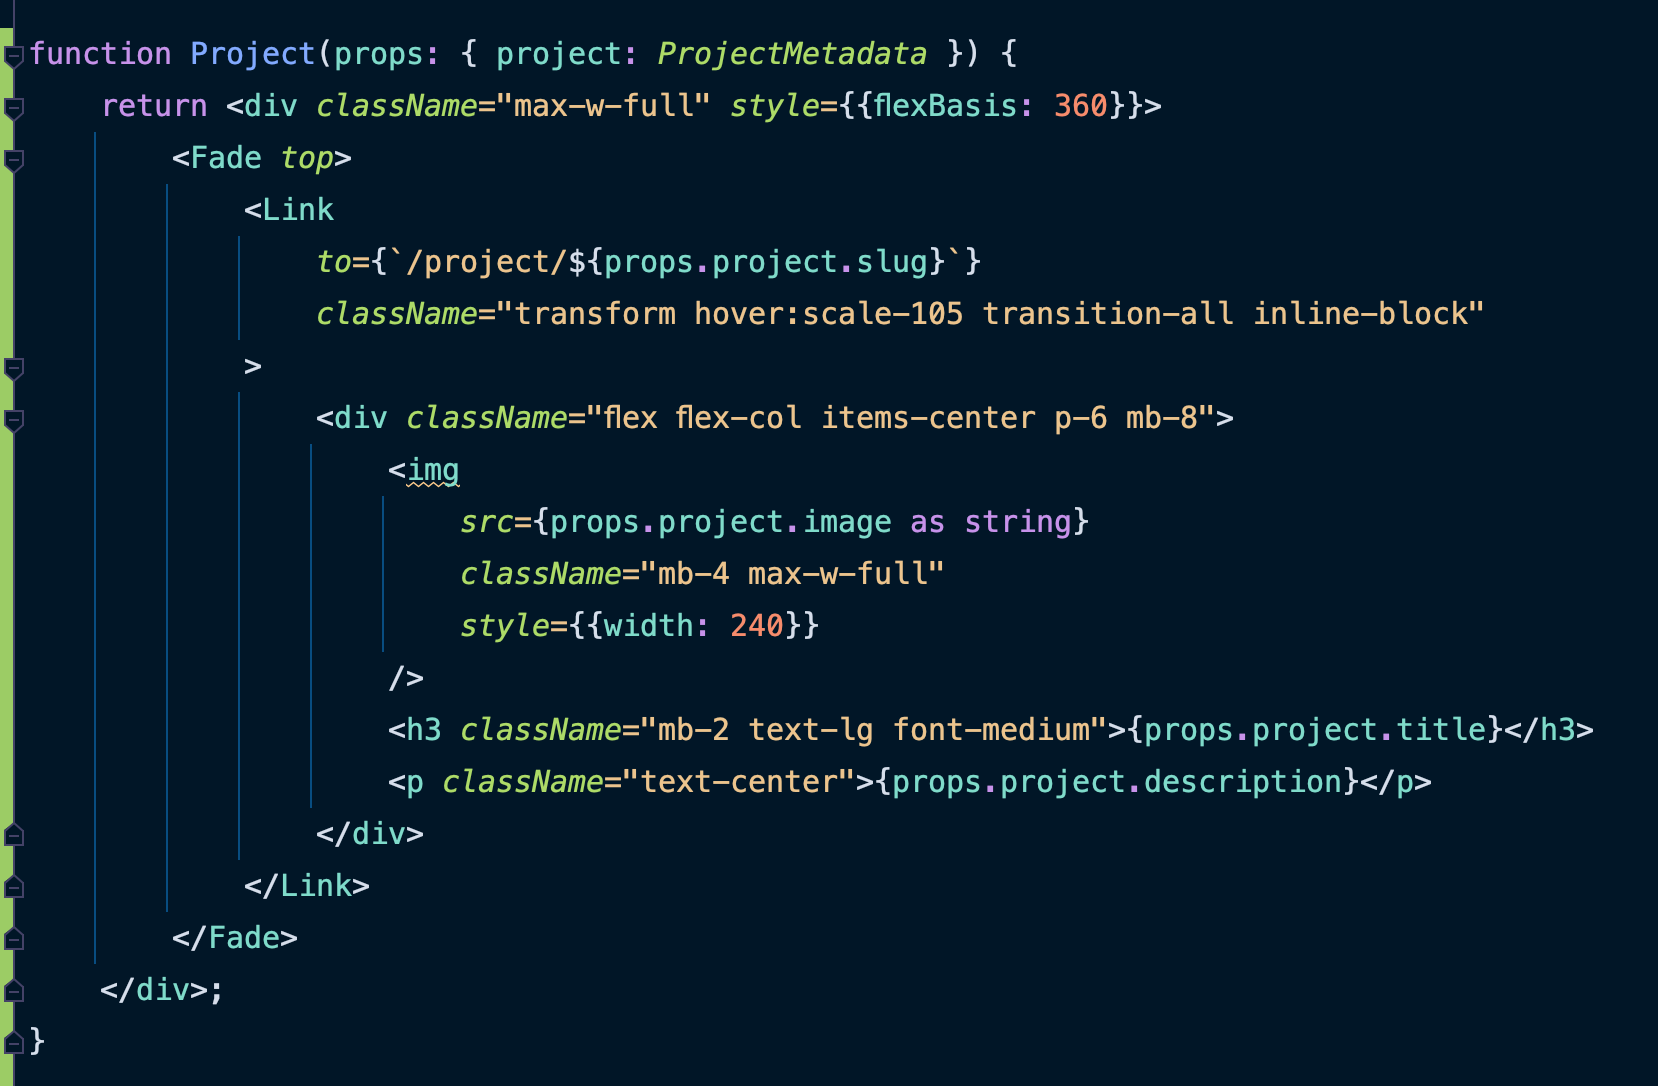 The component WebStorm automatically generated based off of the JSX I wanted to extract